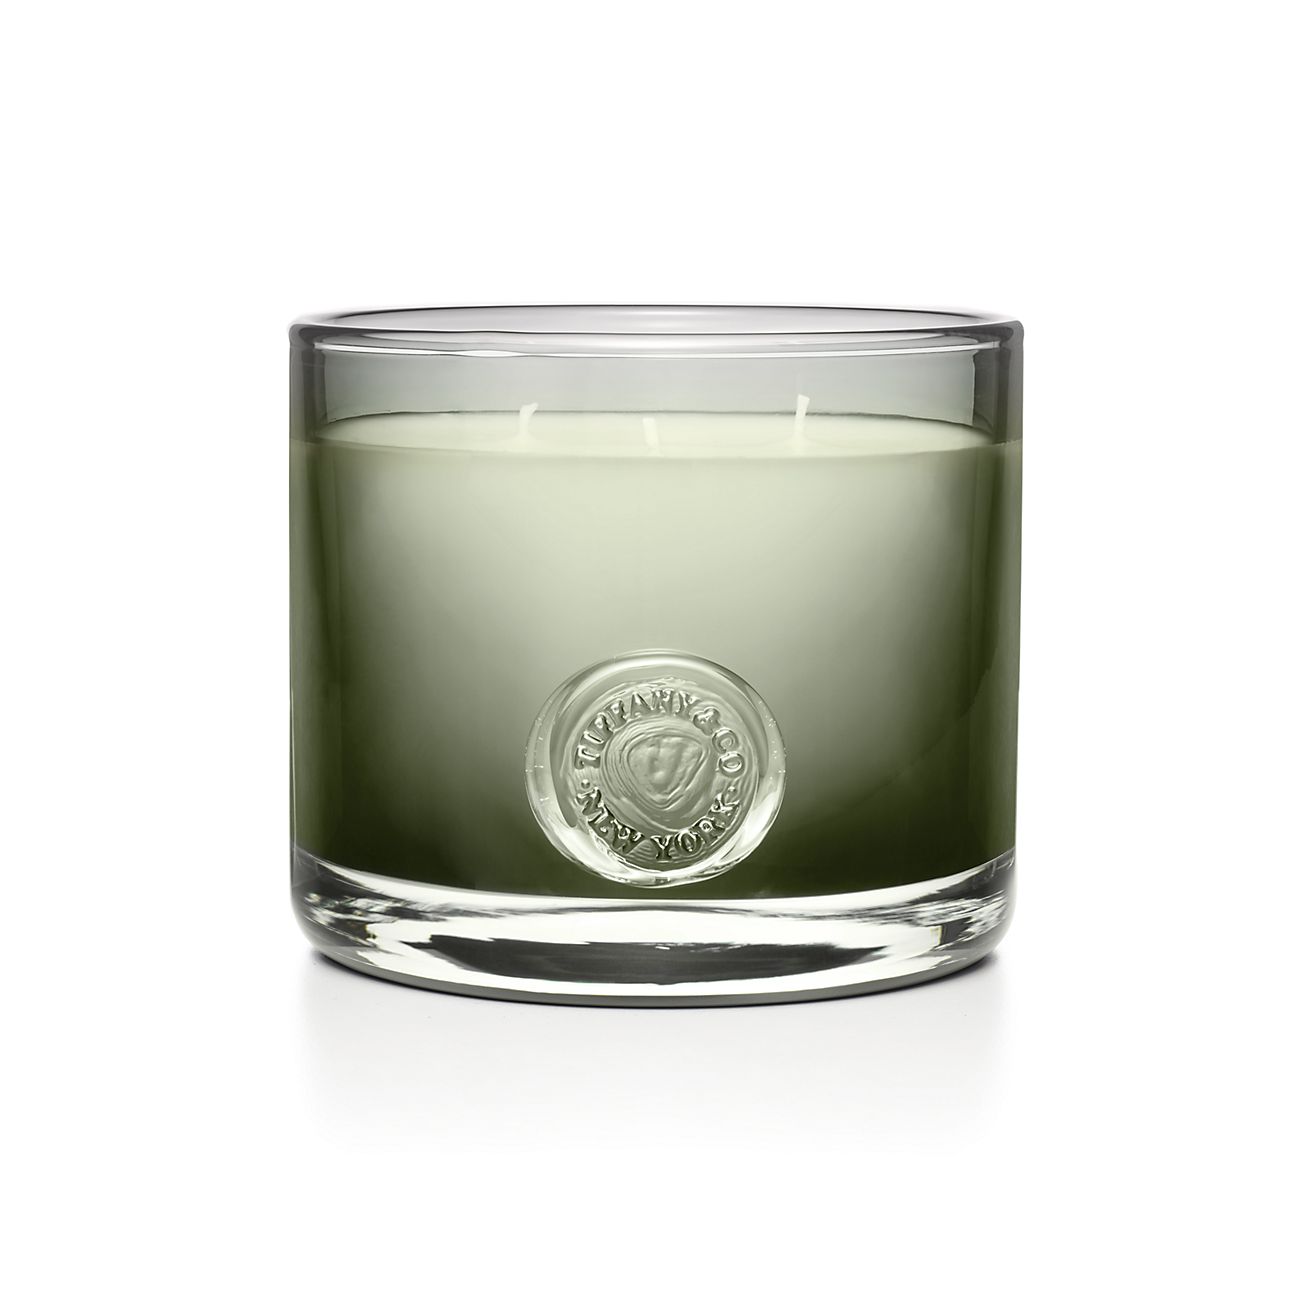 Tiffany Seal three-wick candle in a 